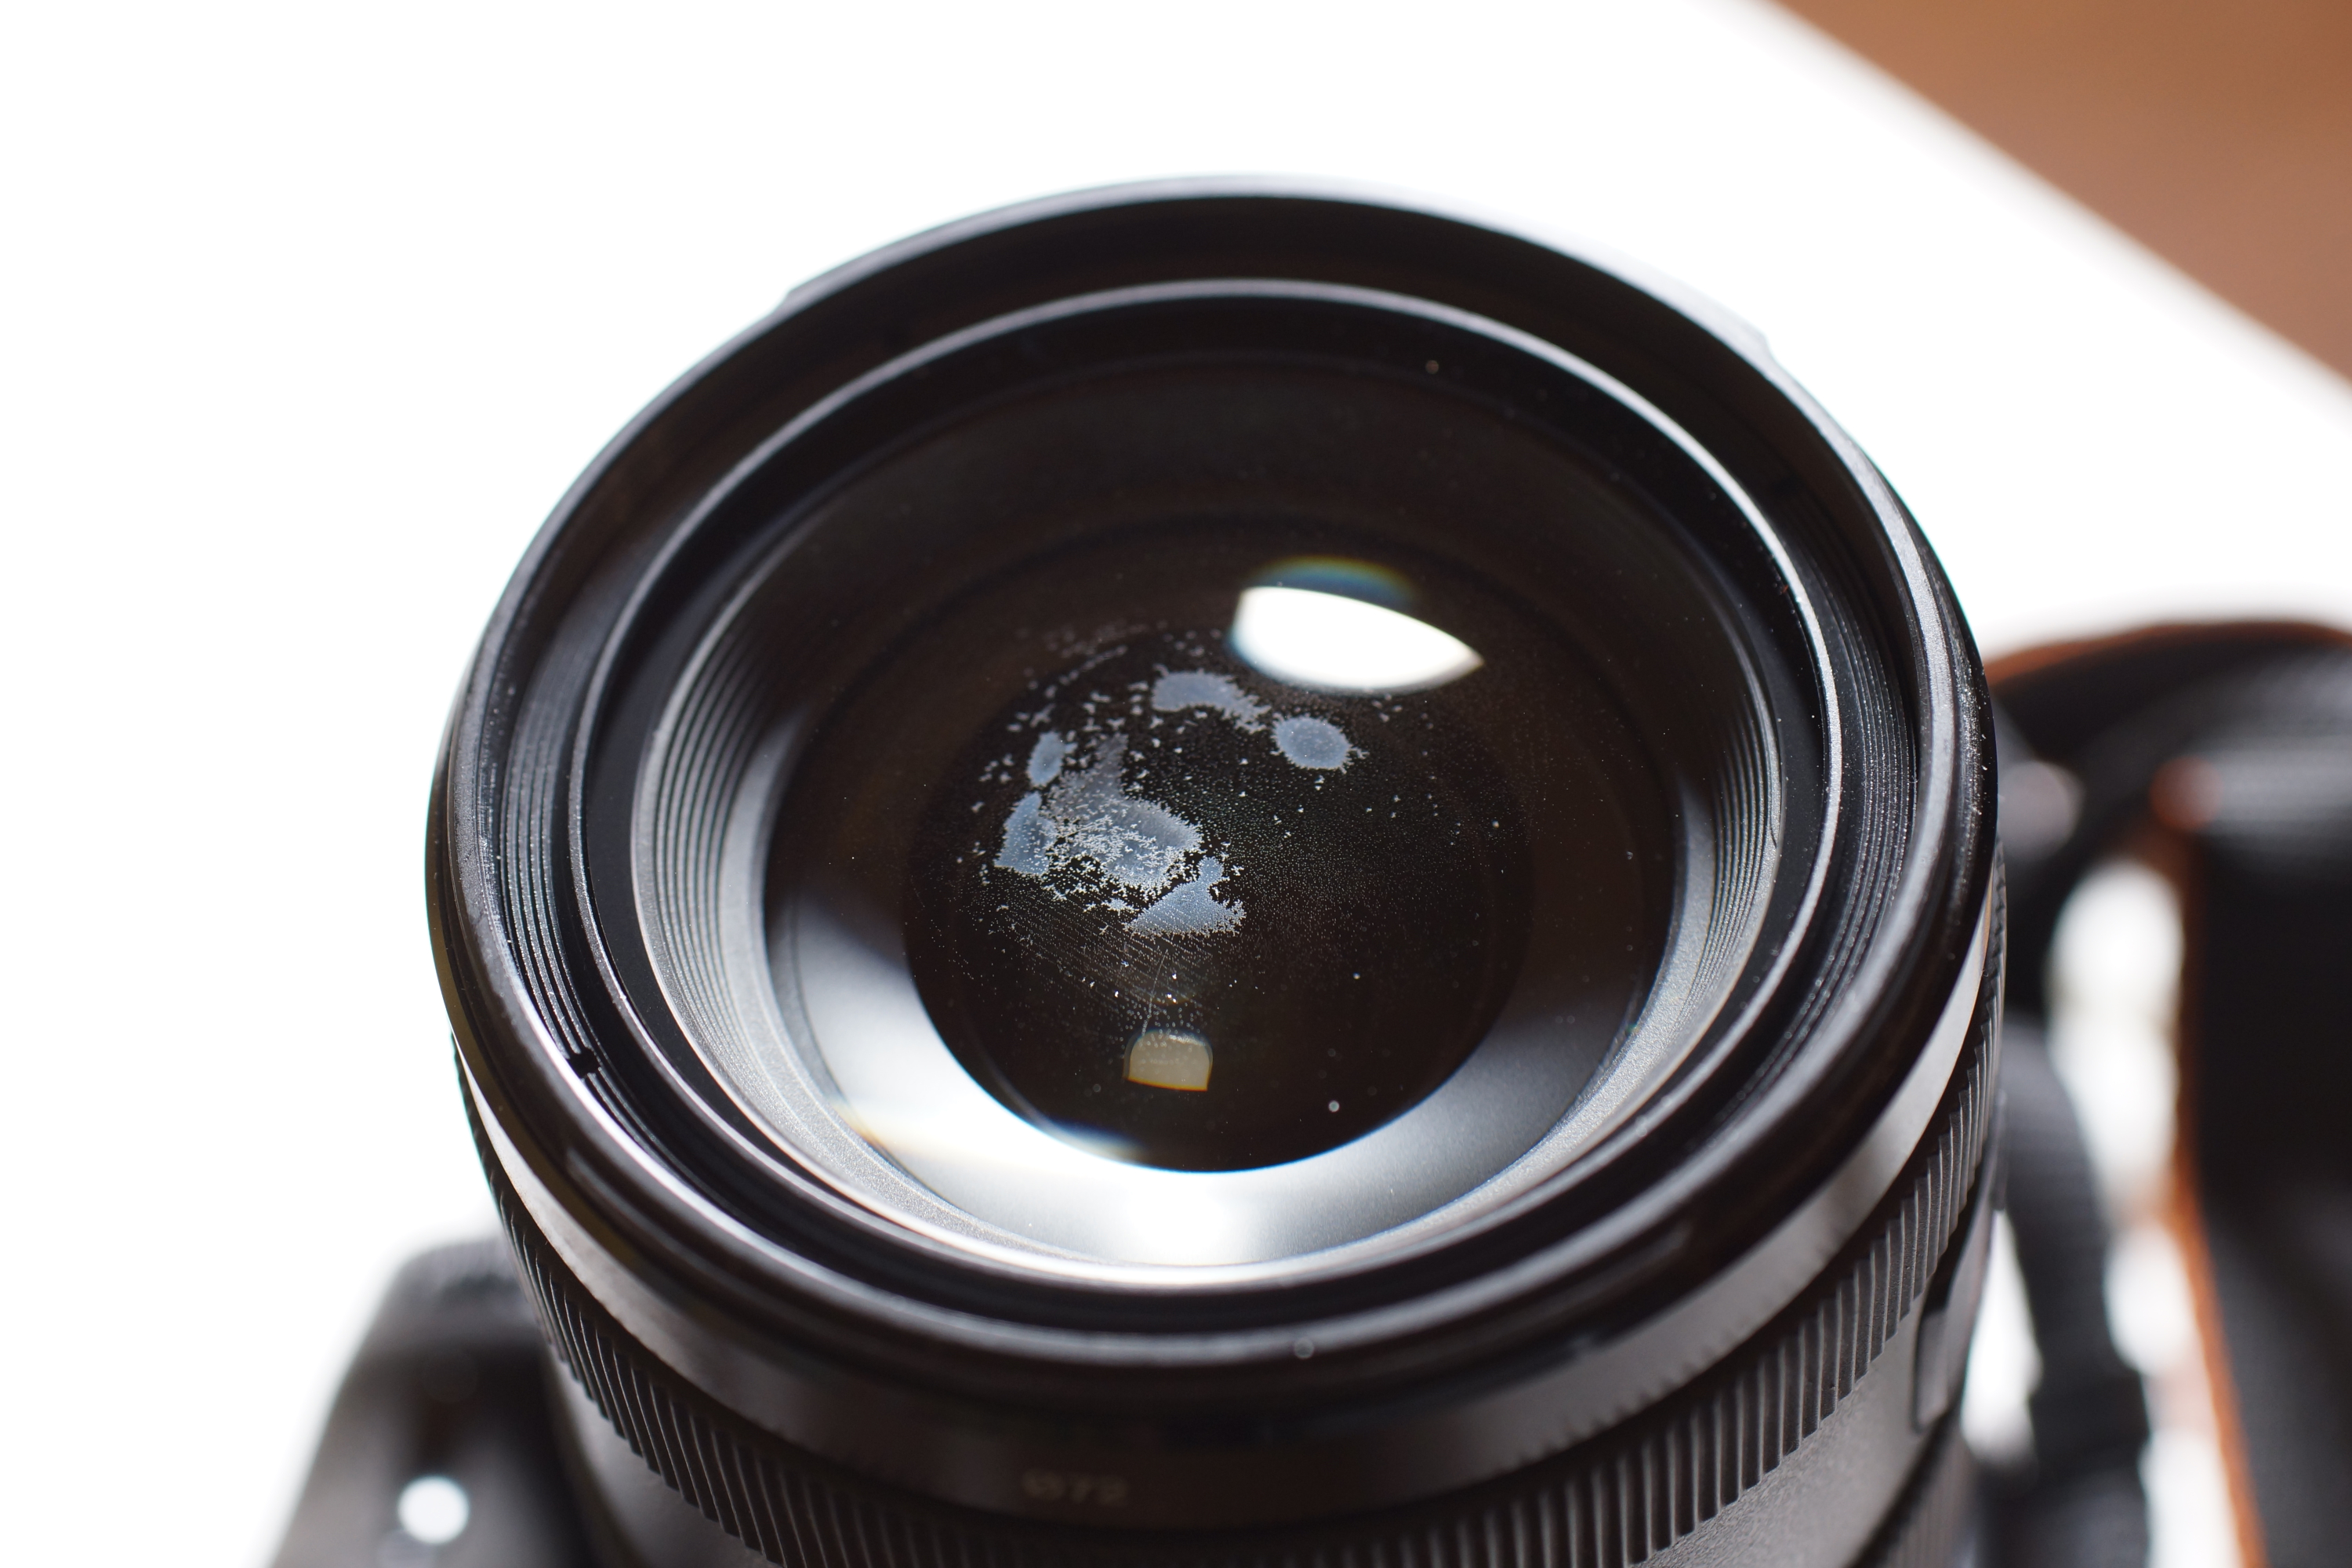 DT 16-50mm F2.8 SSM with "biology" under front glass